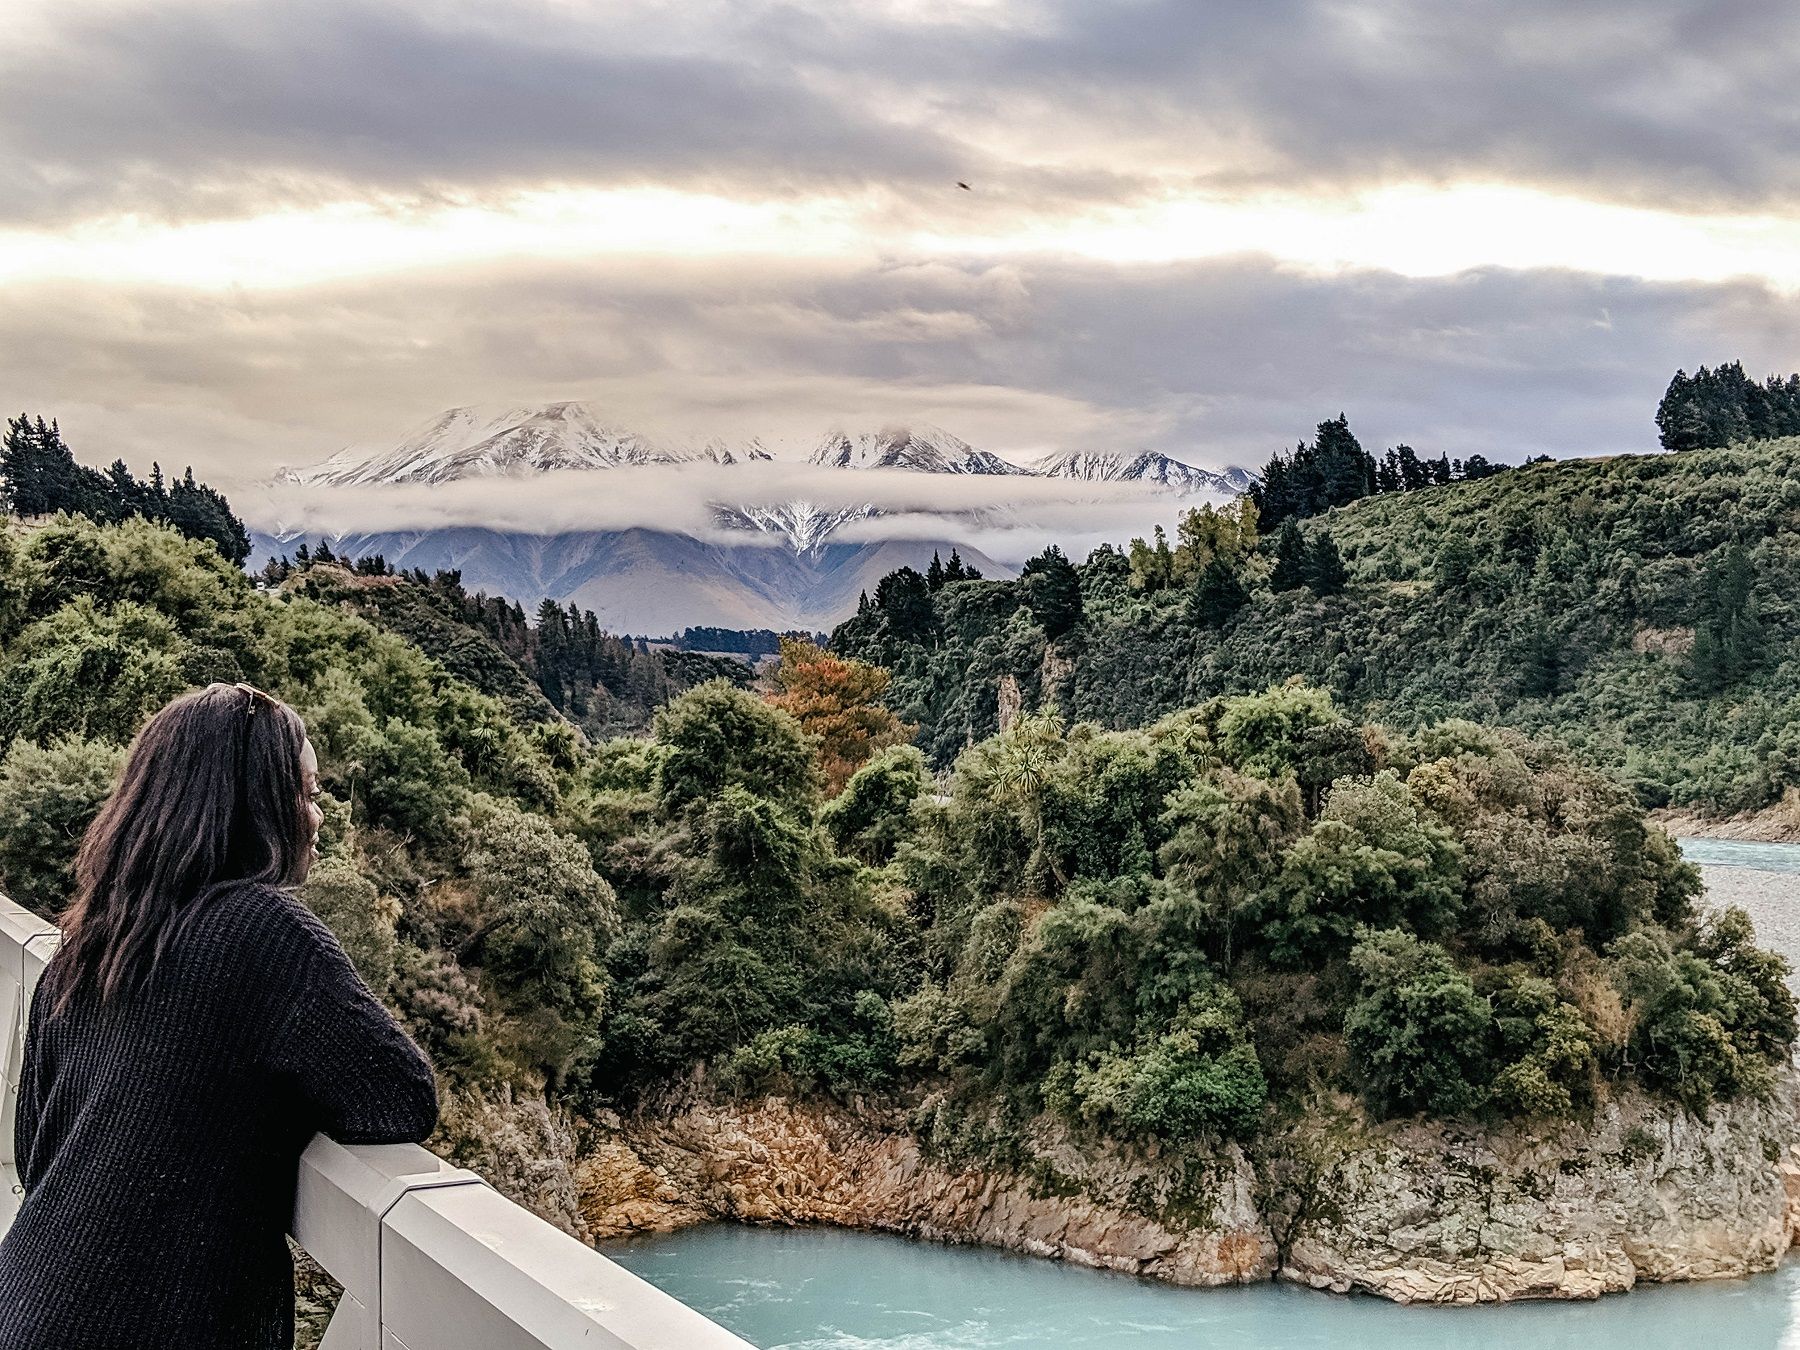 Taking in the beautiful mountains in New Zealand